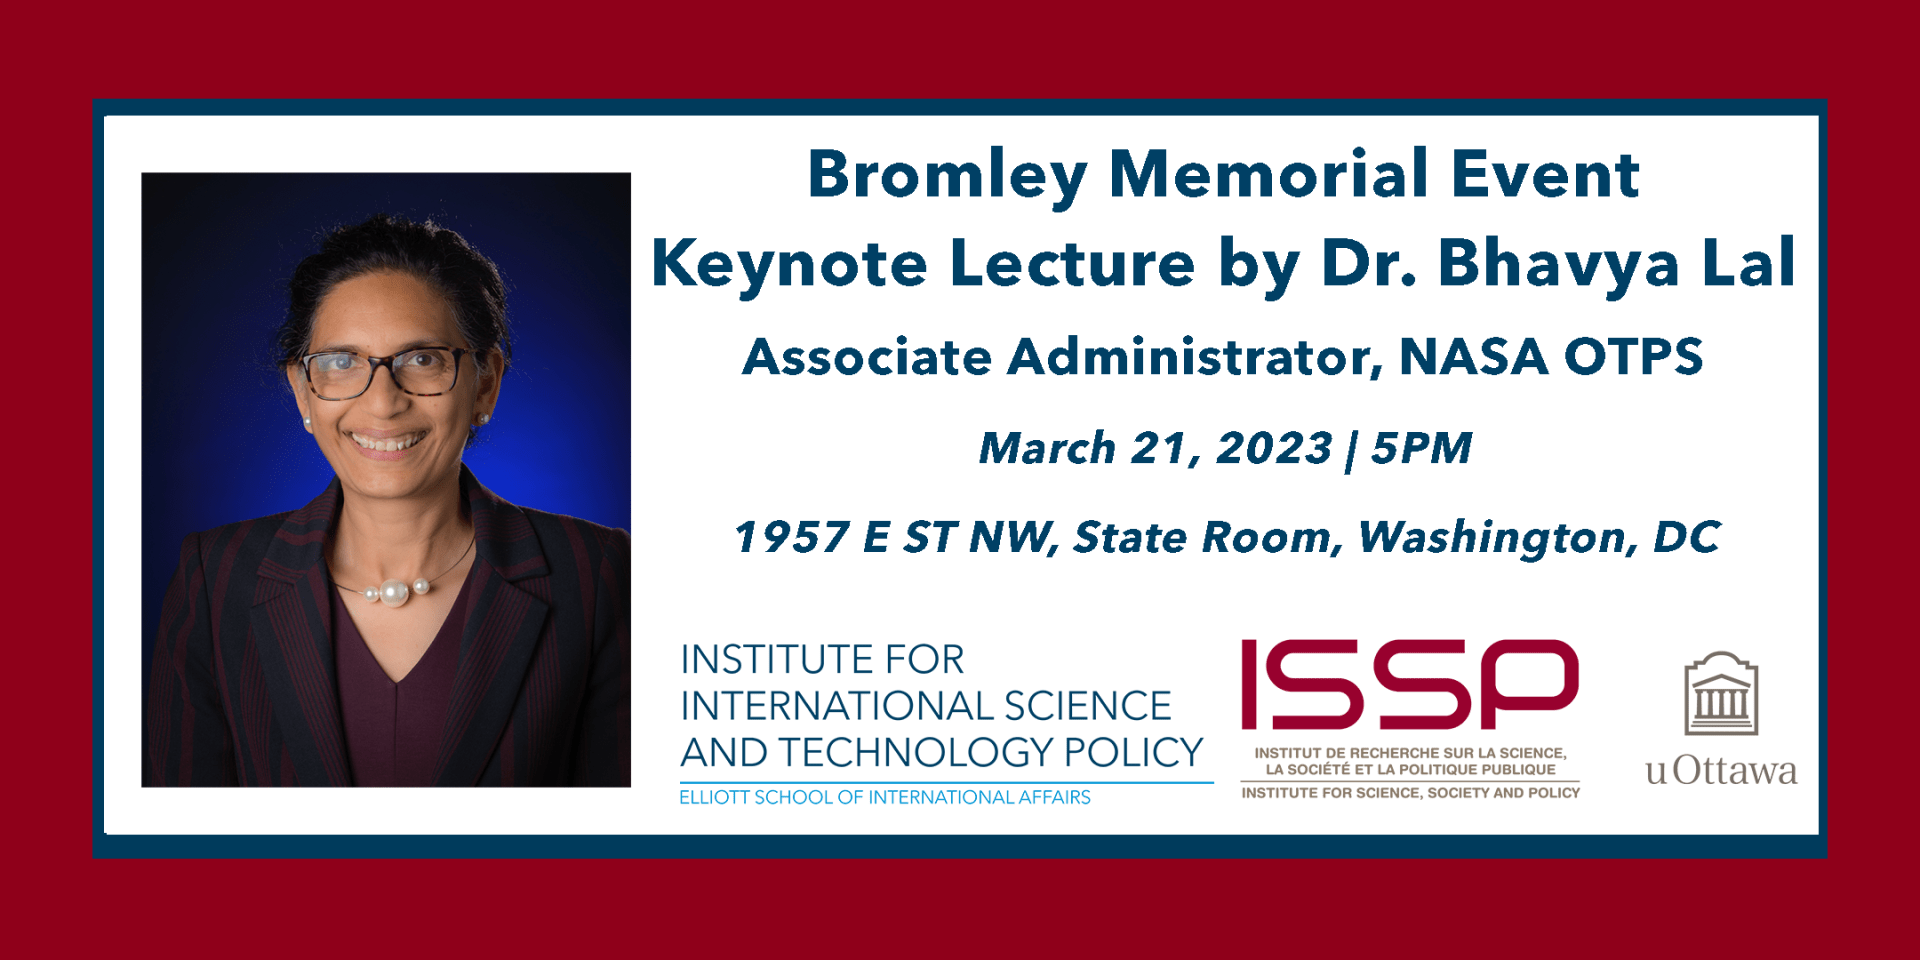 Bromley Memorial Event Keynote Lecture by Dr. Bhavya Lal Associate Administrator, NASA OTPS. March 21, 2023 | 5PM 1957 E ST NW, State Room, Washington DC.